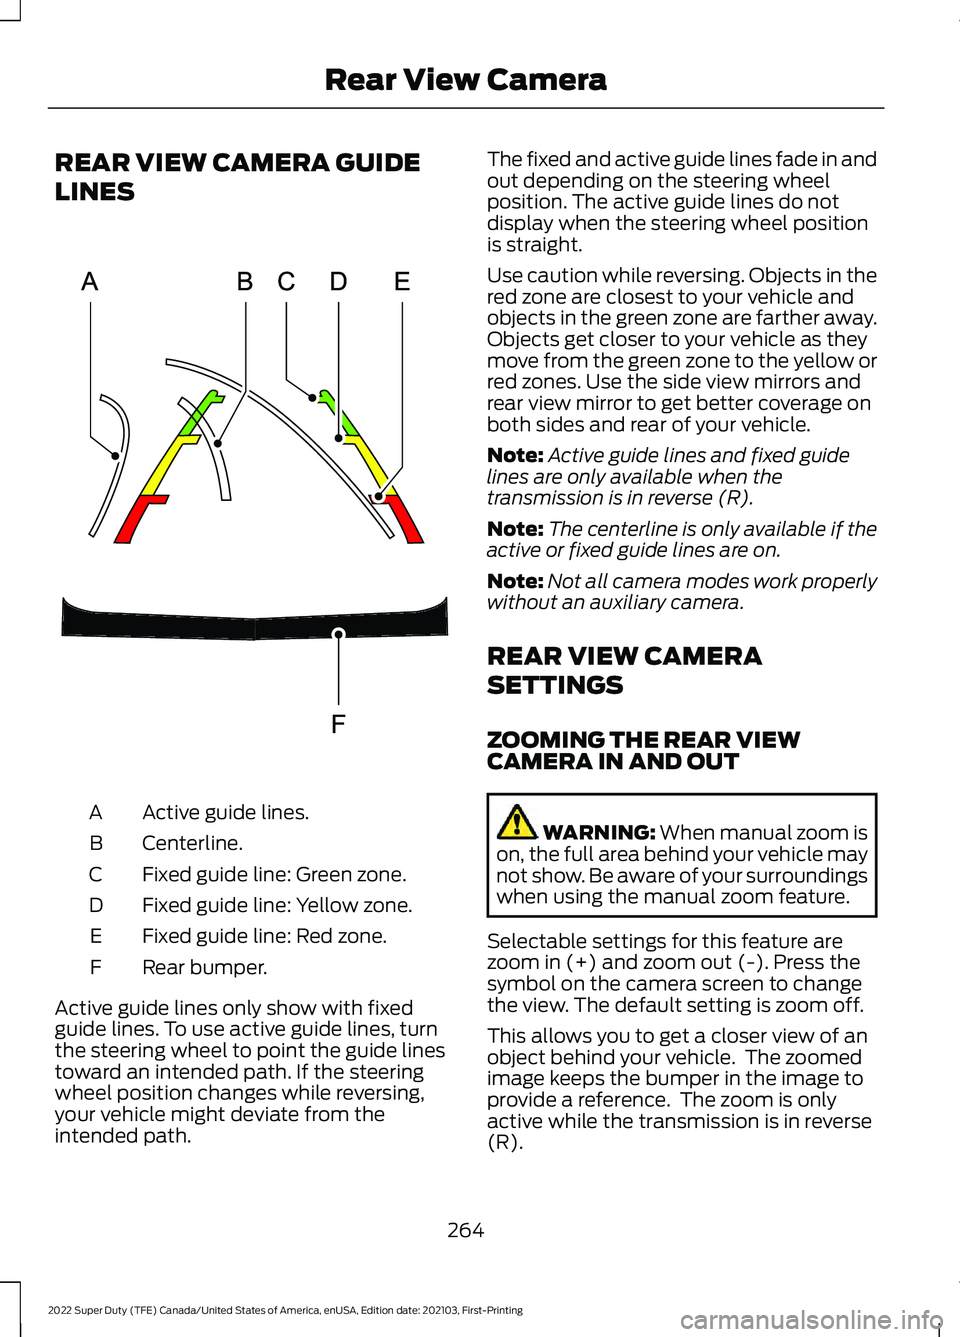 FORD F-550 2022  Owners Manual REAR VIEW CAMERA GUIDE
LINES
Active guide lines.
A
Centerline.
B
Fixed guide line: Green zone.
C
Fixed guide line: Yellow zone.
D
Fixed guide line: Red zone.
E
Rear bumper.
F
Active guide lines only s